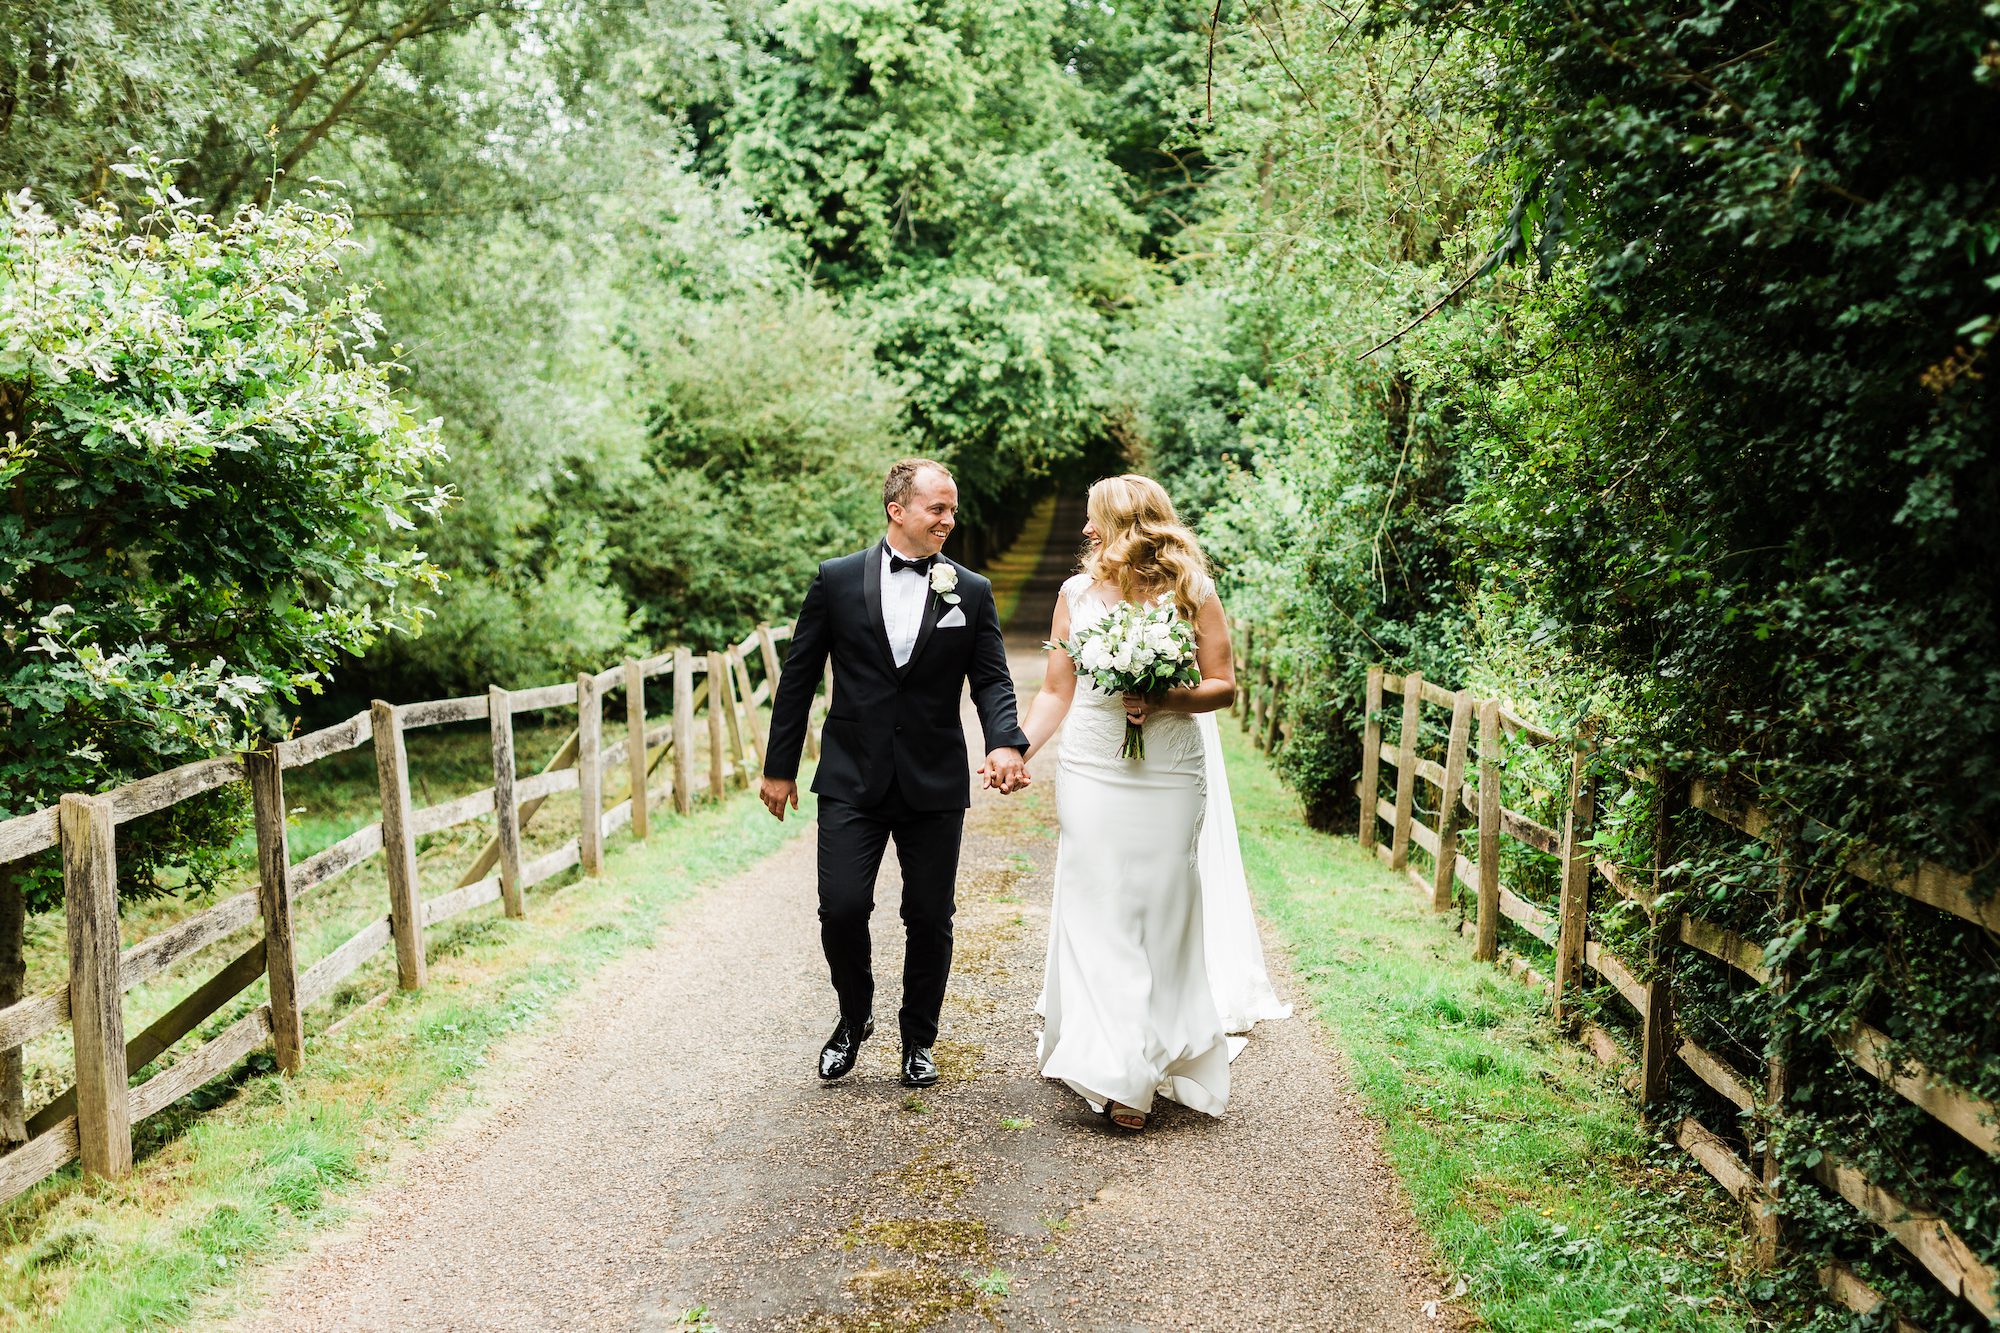 Steph & Nick’s wedding at Notley Abbey